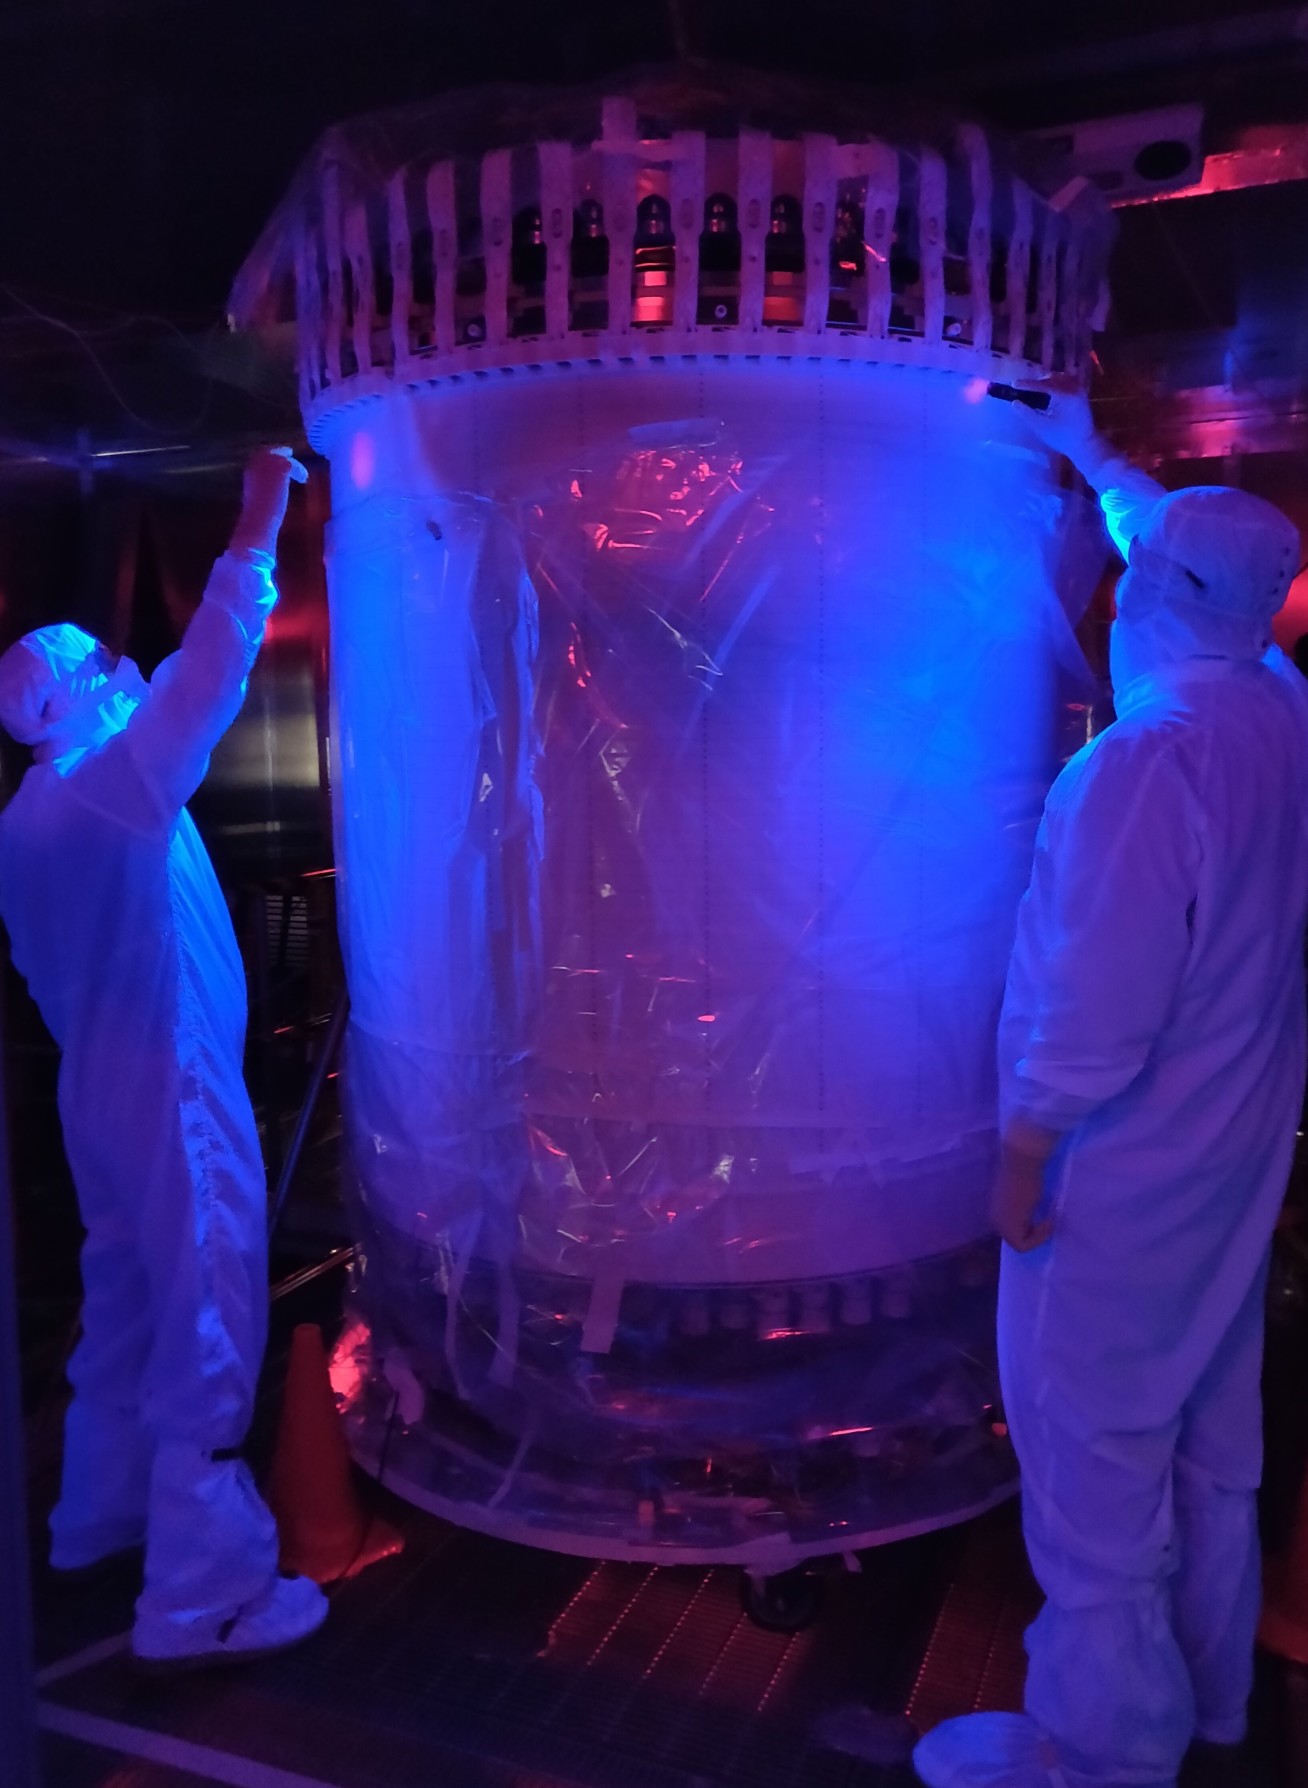 Two people in hazmat suits inspecting a large cylinder under UV light